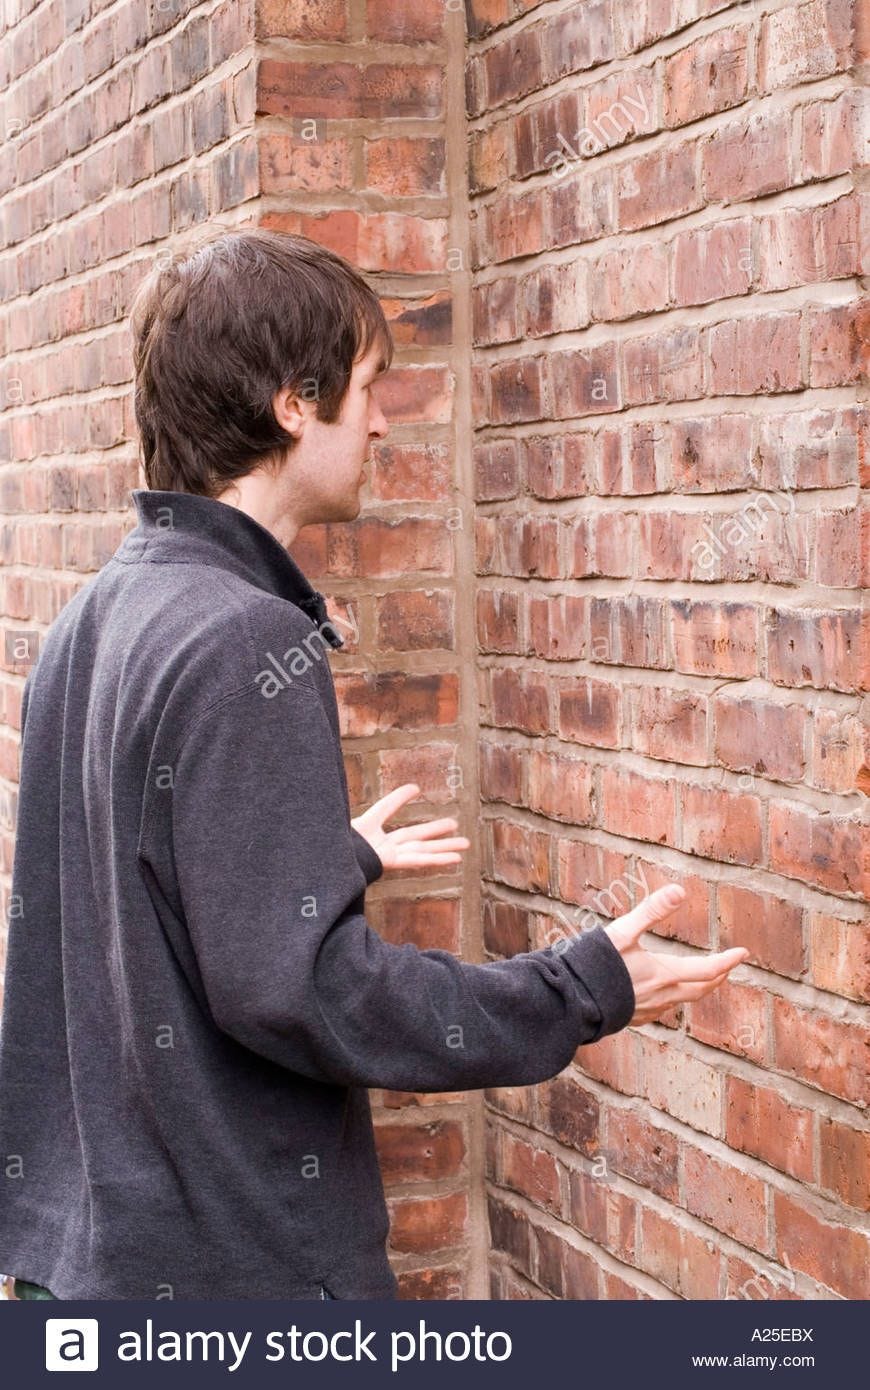 Image result for talking to a brick wall | Brick wall, Brick, You lost me